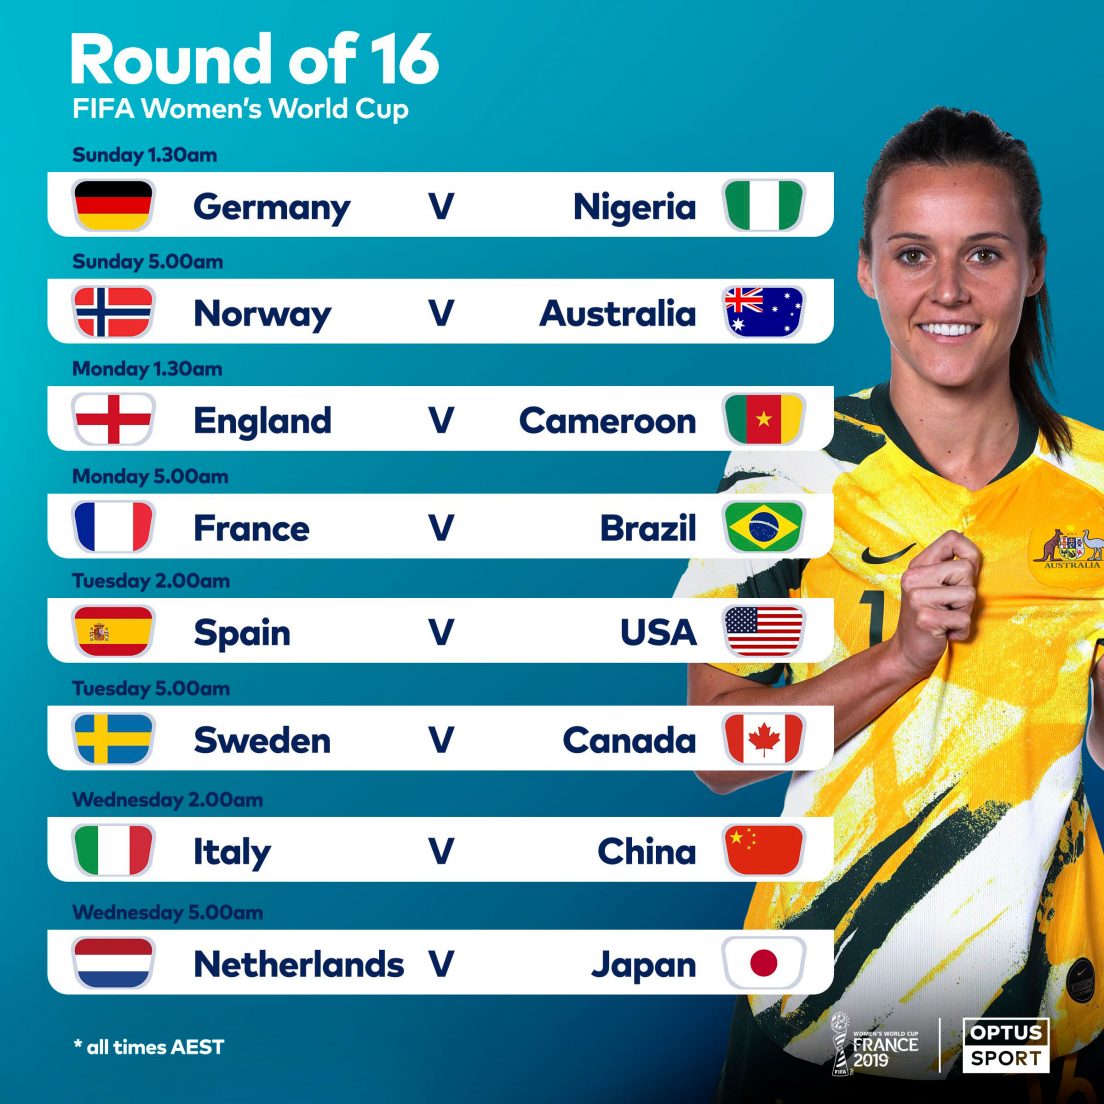 TV Guide Optus Sport live & exclusive for round of 16 WWC games